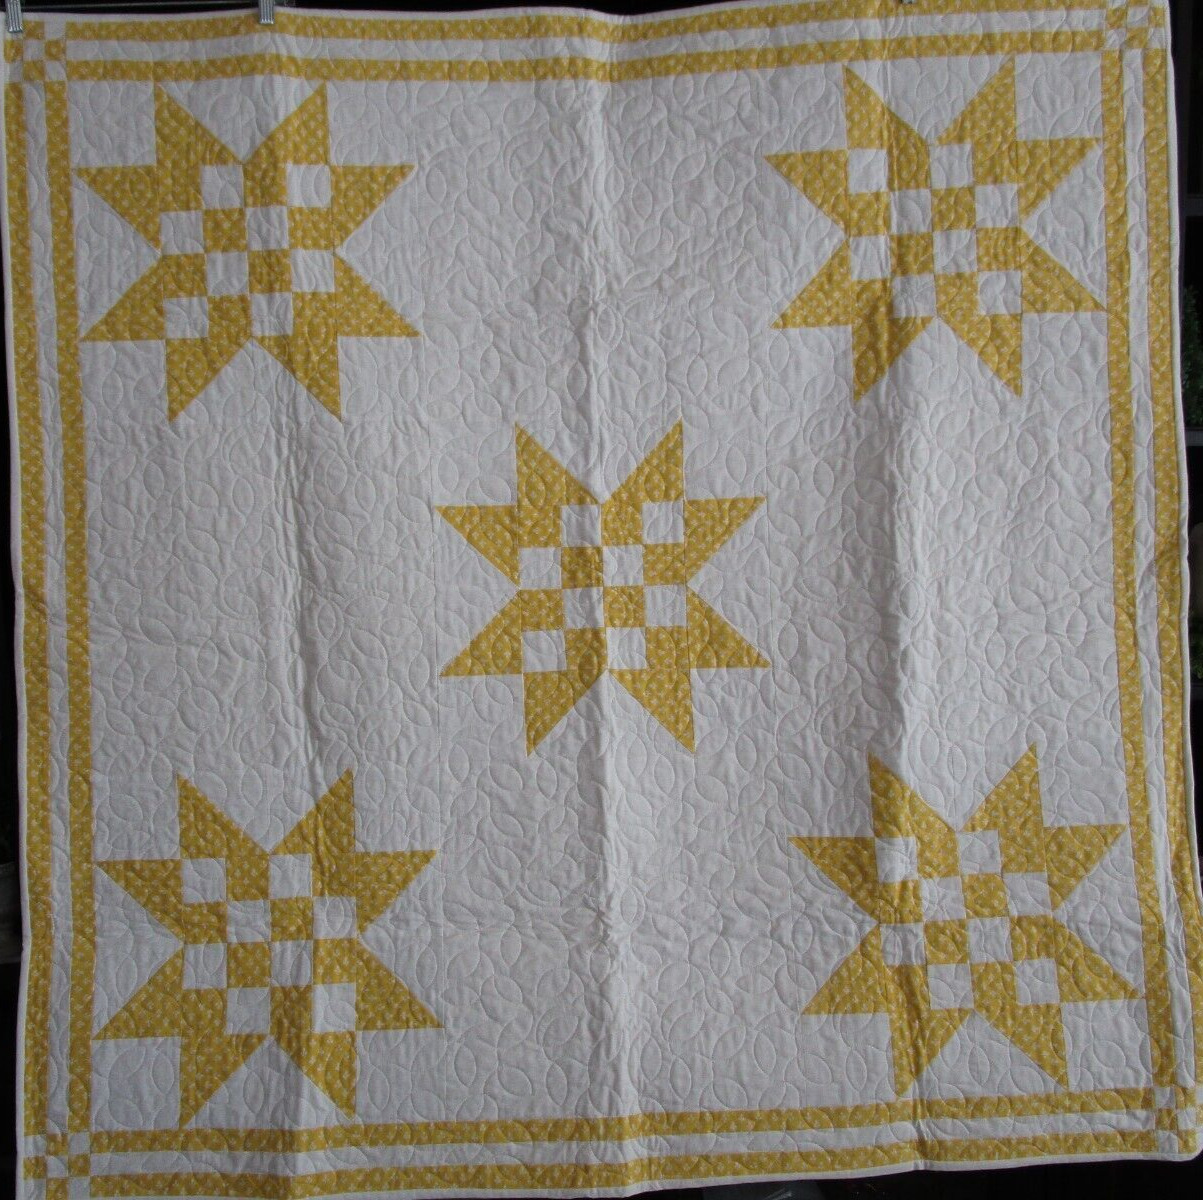 VINTAGE LOOK HANDMADE QUILT, STAR PATCHWORK, 2 COLOR, YELLOW, WHITE, 54X54 NEW